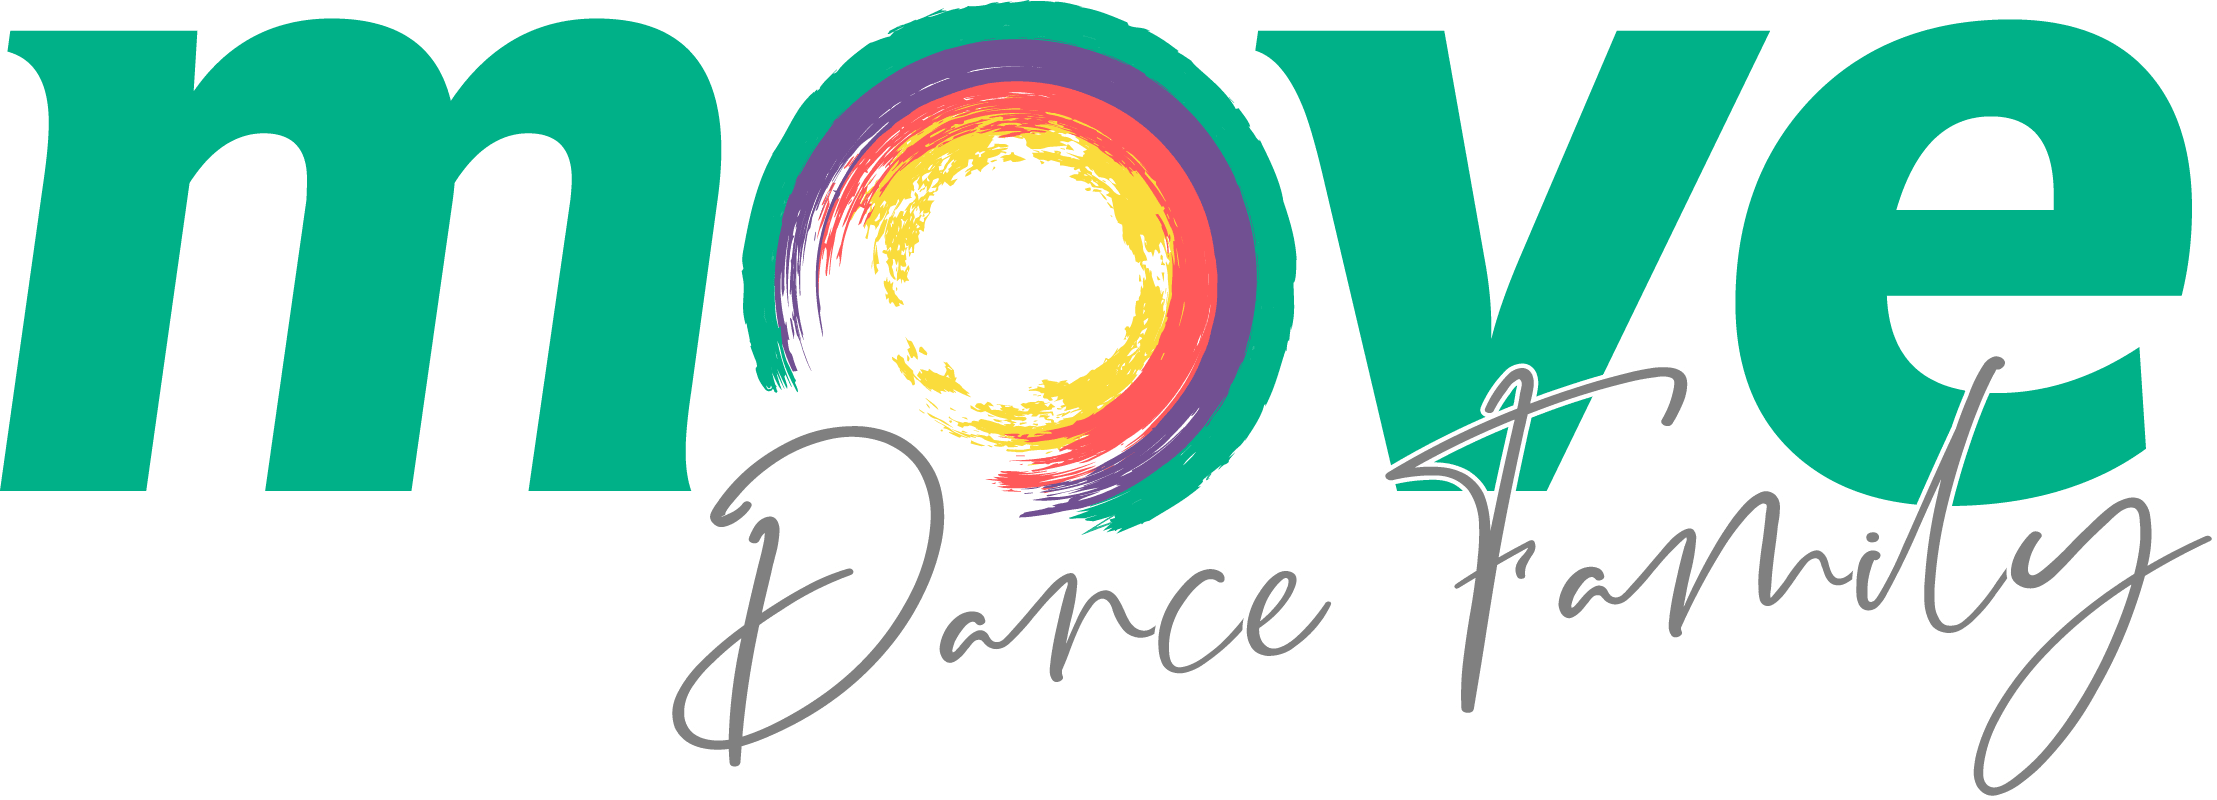 Move Dance Family formerly move dance and fitness new logo